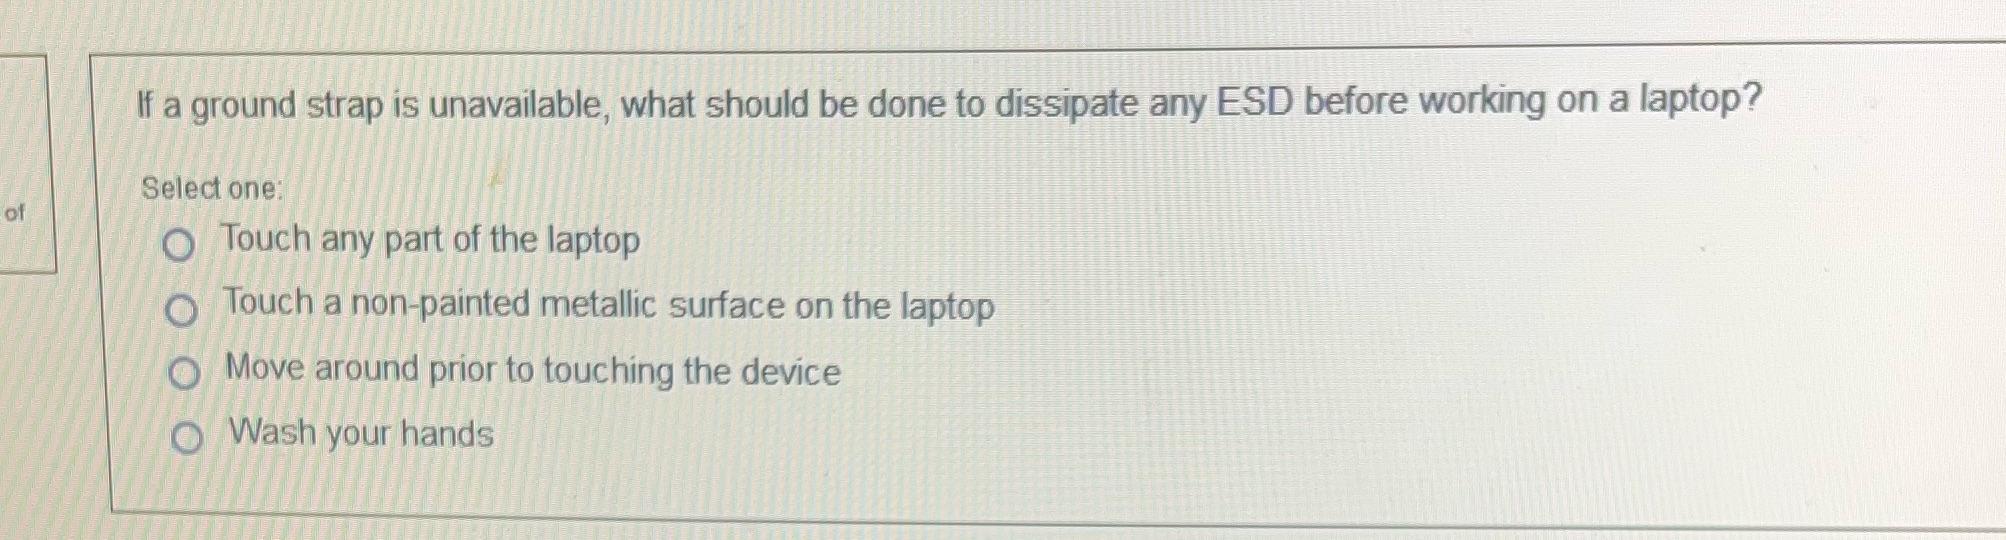 of If a ground strap is unavailable, what should be done to dissipate any ESD before working on a laptop?